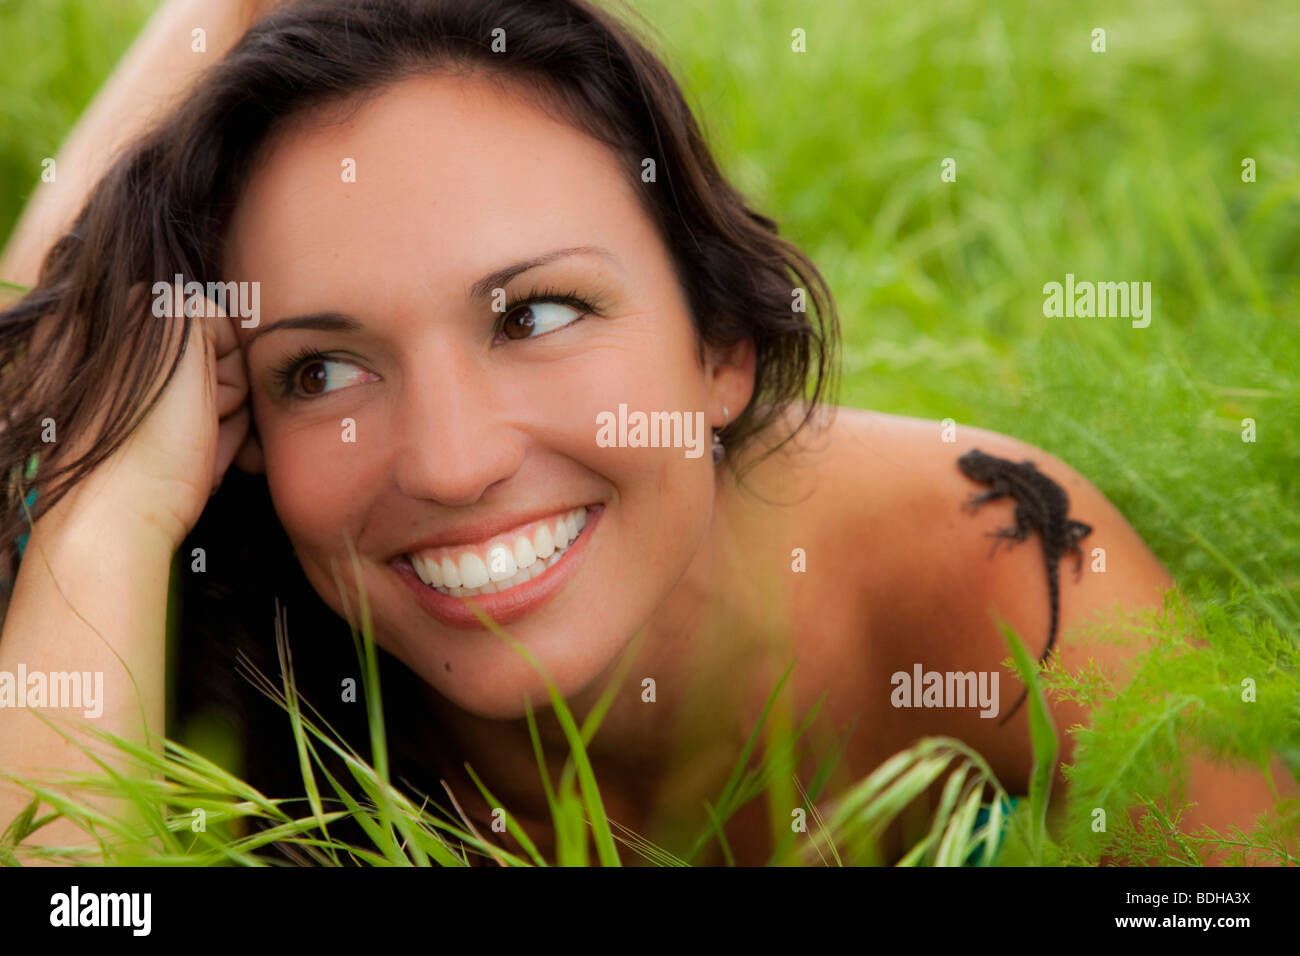 Happy young woman in a field of fresh grass smiles as a small lizard crawls up her shoulder. Stock Photo